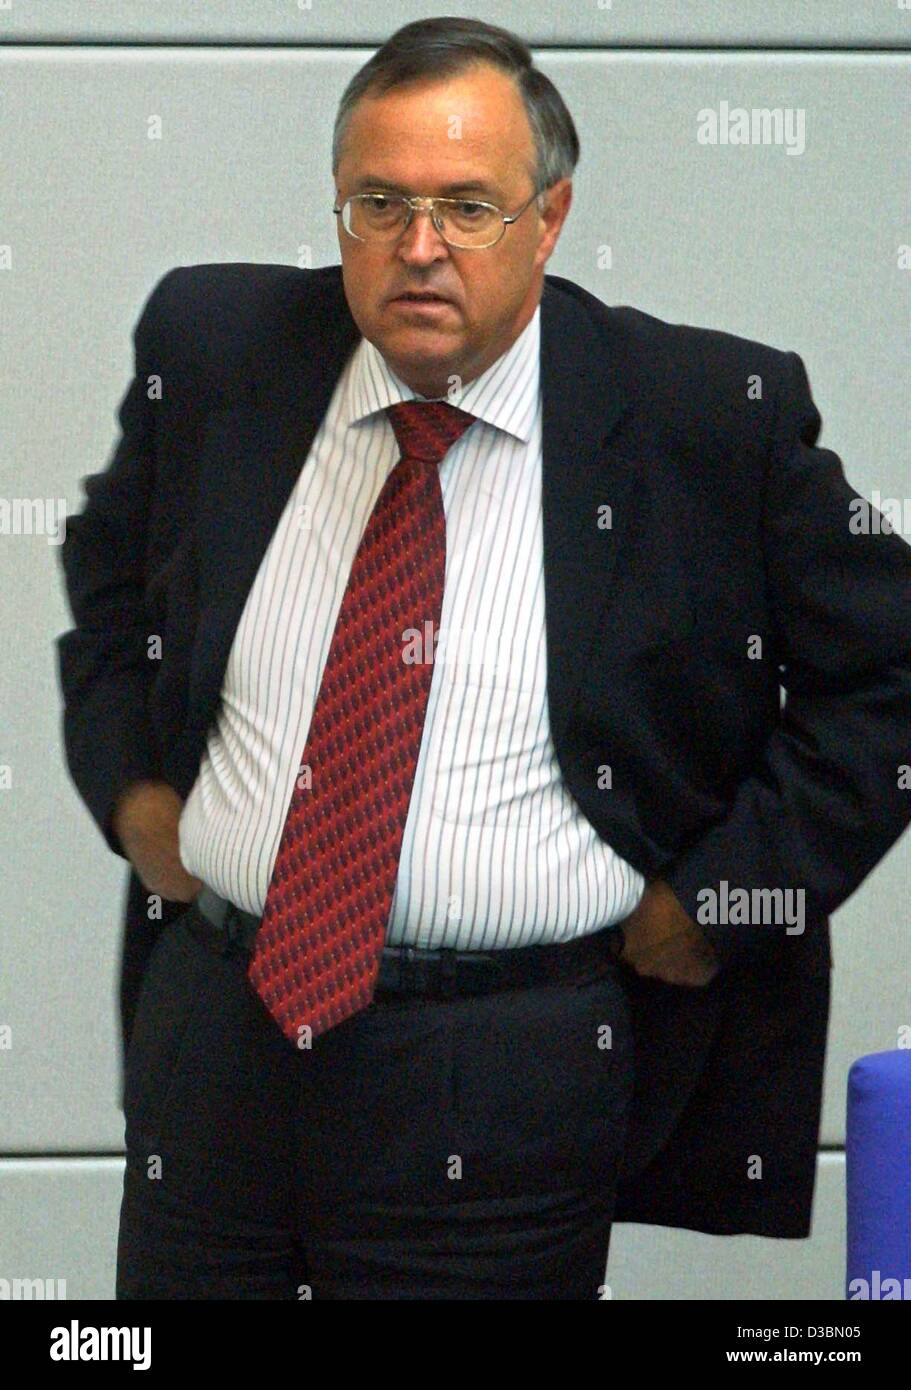 (dpa) - German Finance Minister Hans Eichel pulls up his trousers during a debate on consumer protection in the Bundestag in Berlin, 22 May 2003. Stock Photo